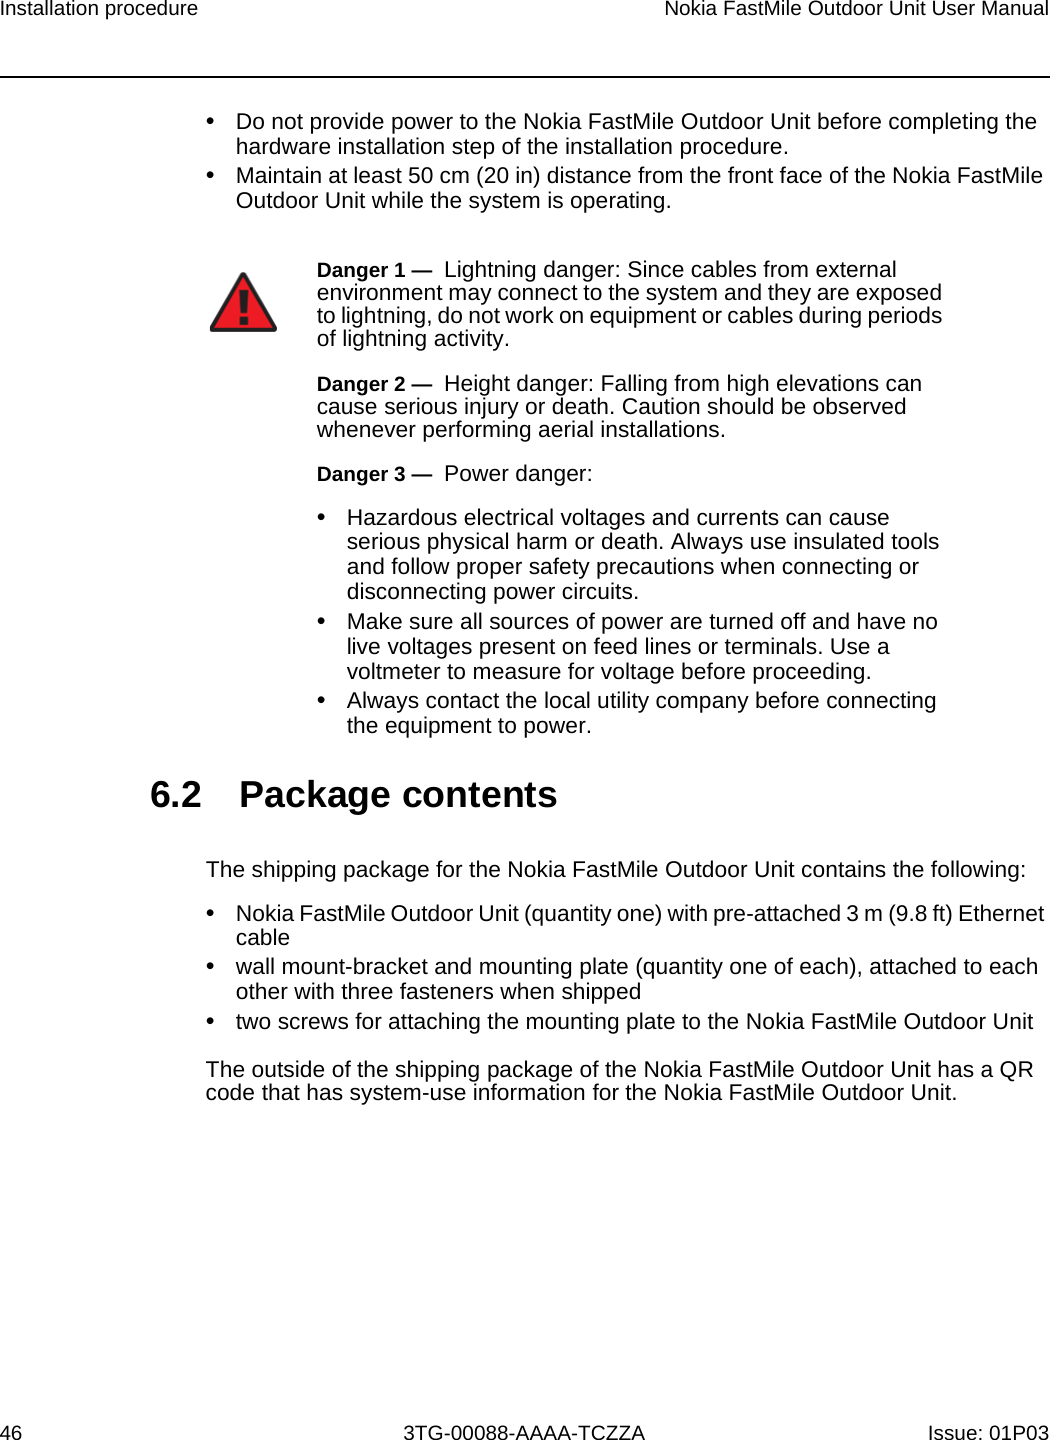 Page 41 of Nokia Bell 34003800FM20 FastMile Compact User Manual Nokia FastMile Outdoor Unit